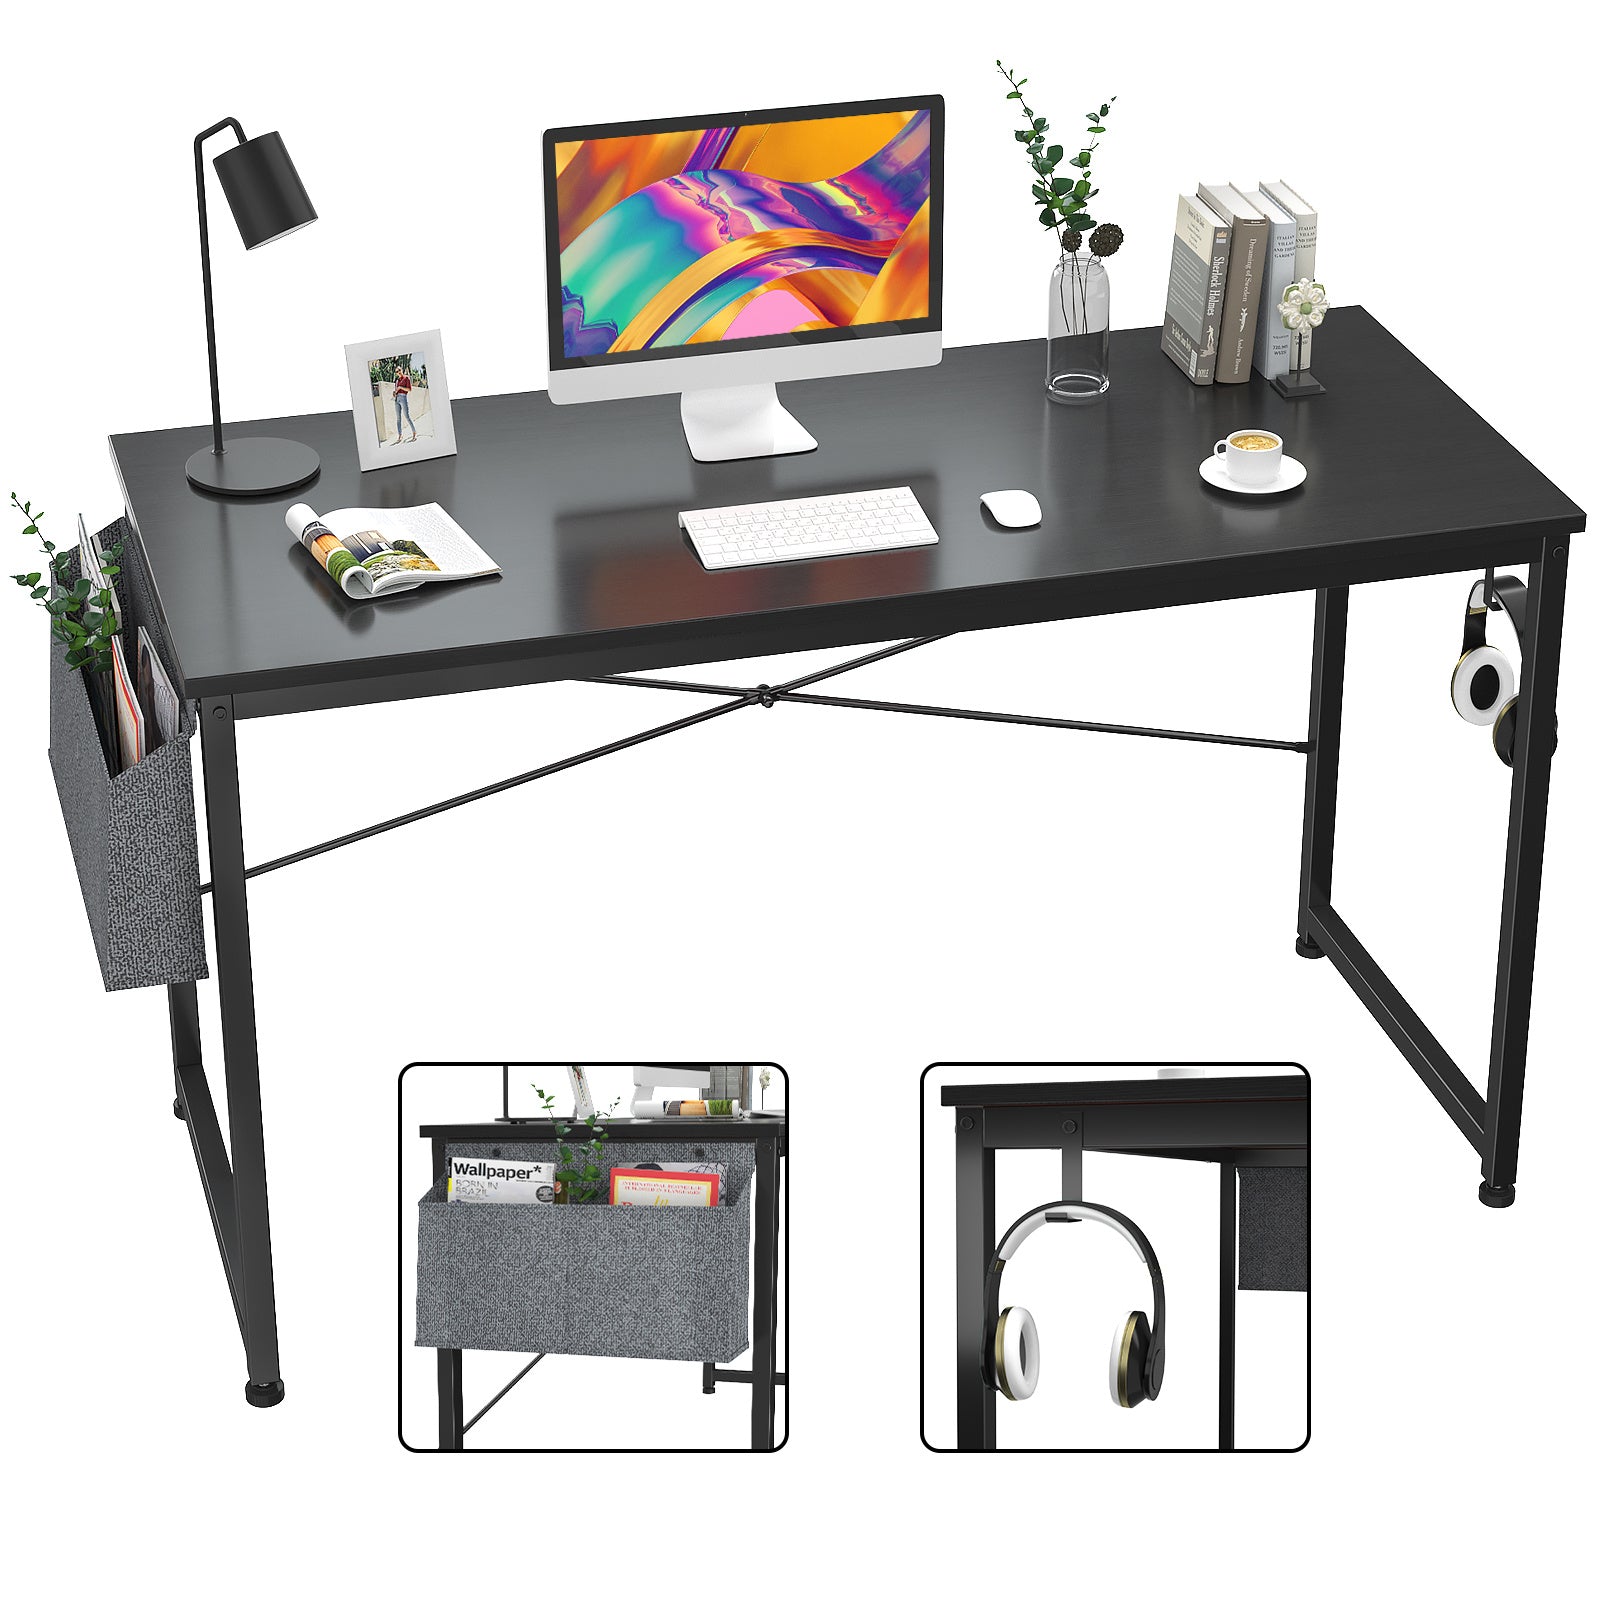 Free shipping Computer Desk 47 inch Home Office Writing Study Desk, Modern Simple Style Laptop Table with Storage Bag multicolor